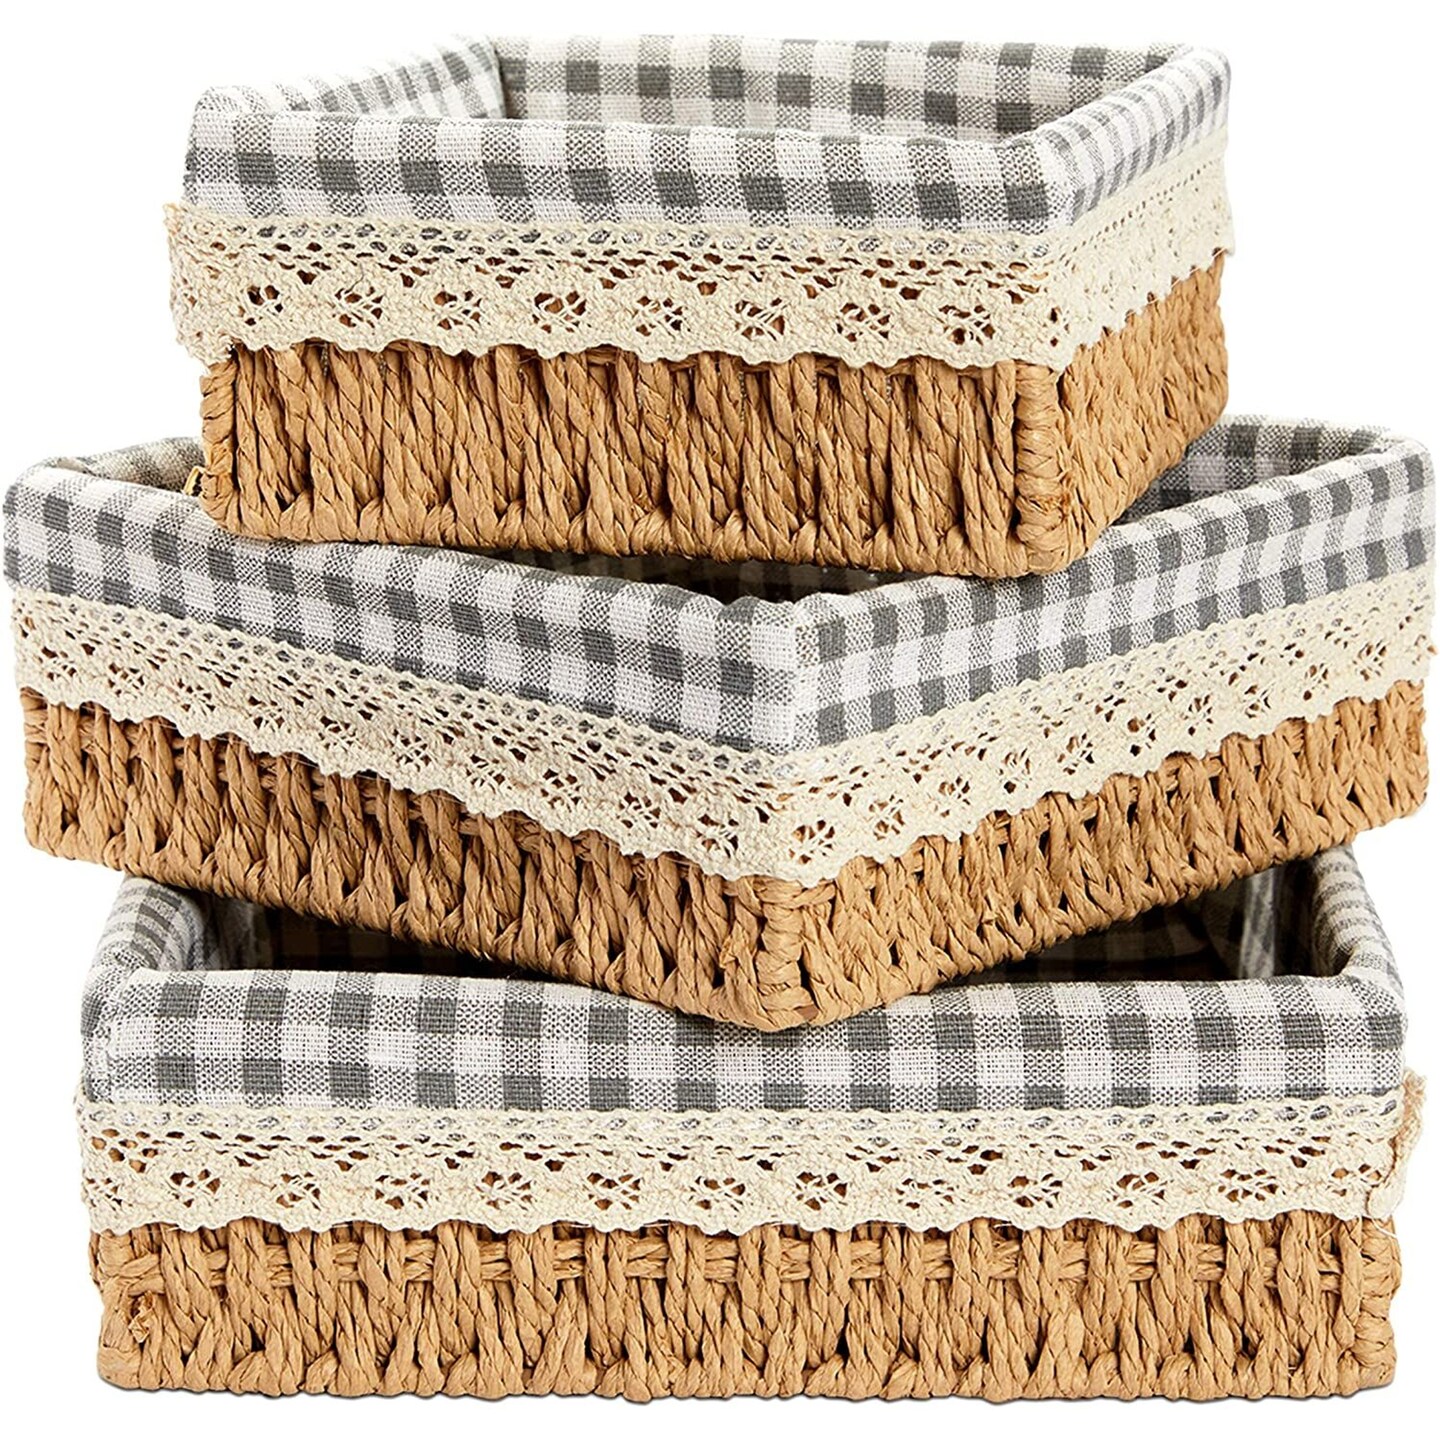 Set of 3 Rectangular Wicker Baskets with Removable Liner, Woven Storage Shelves (3 Sizes)